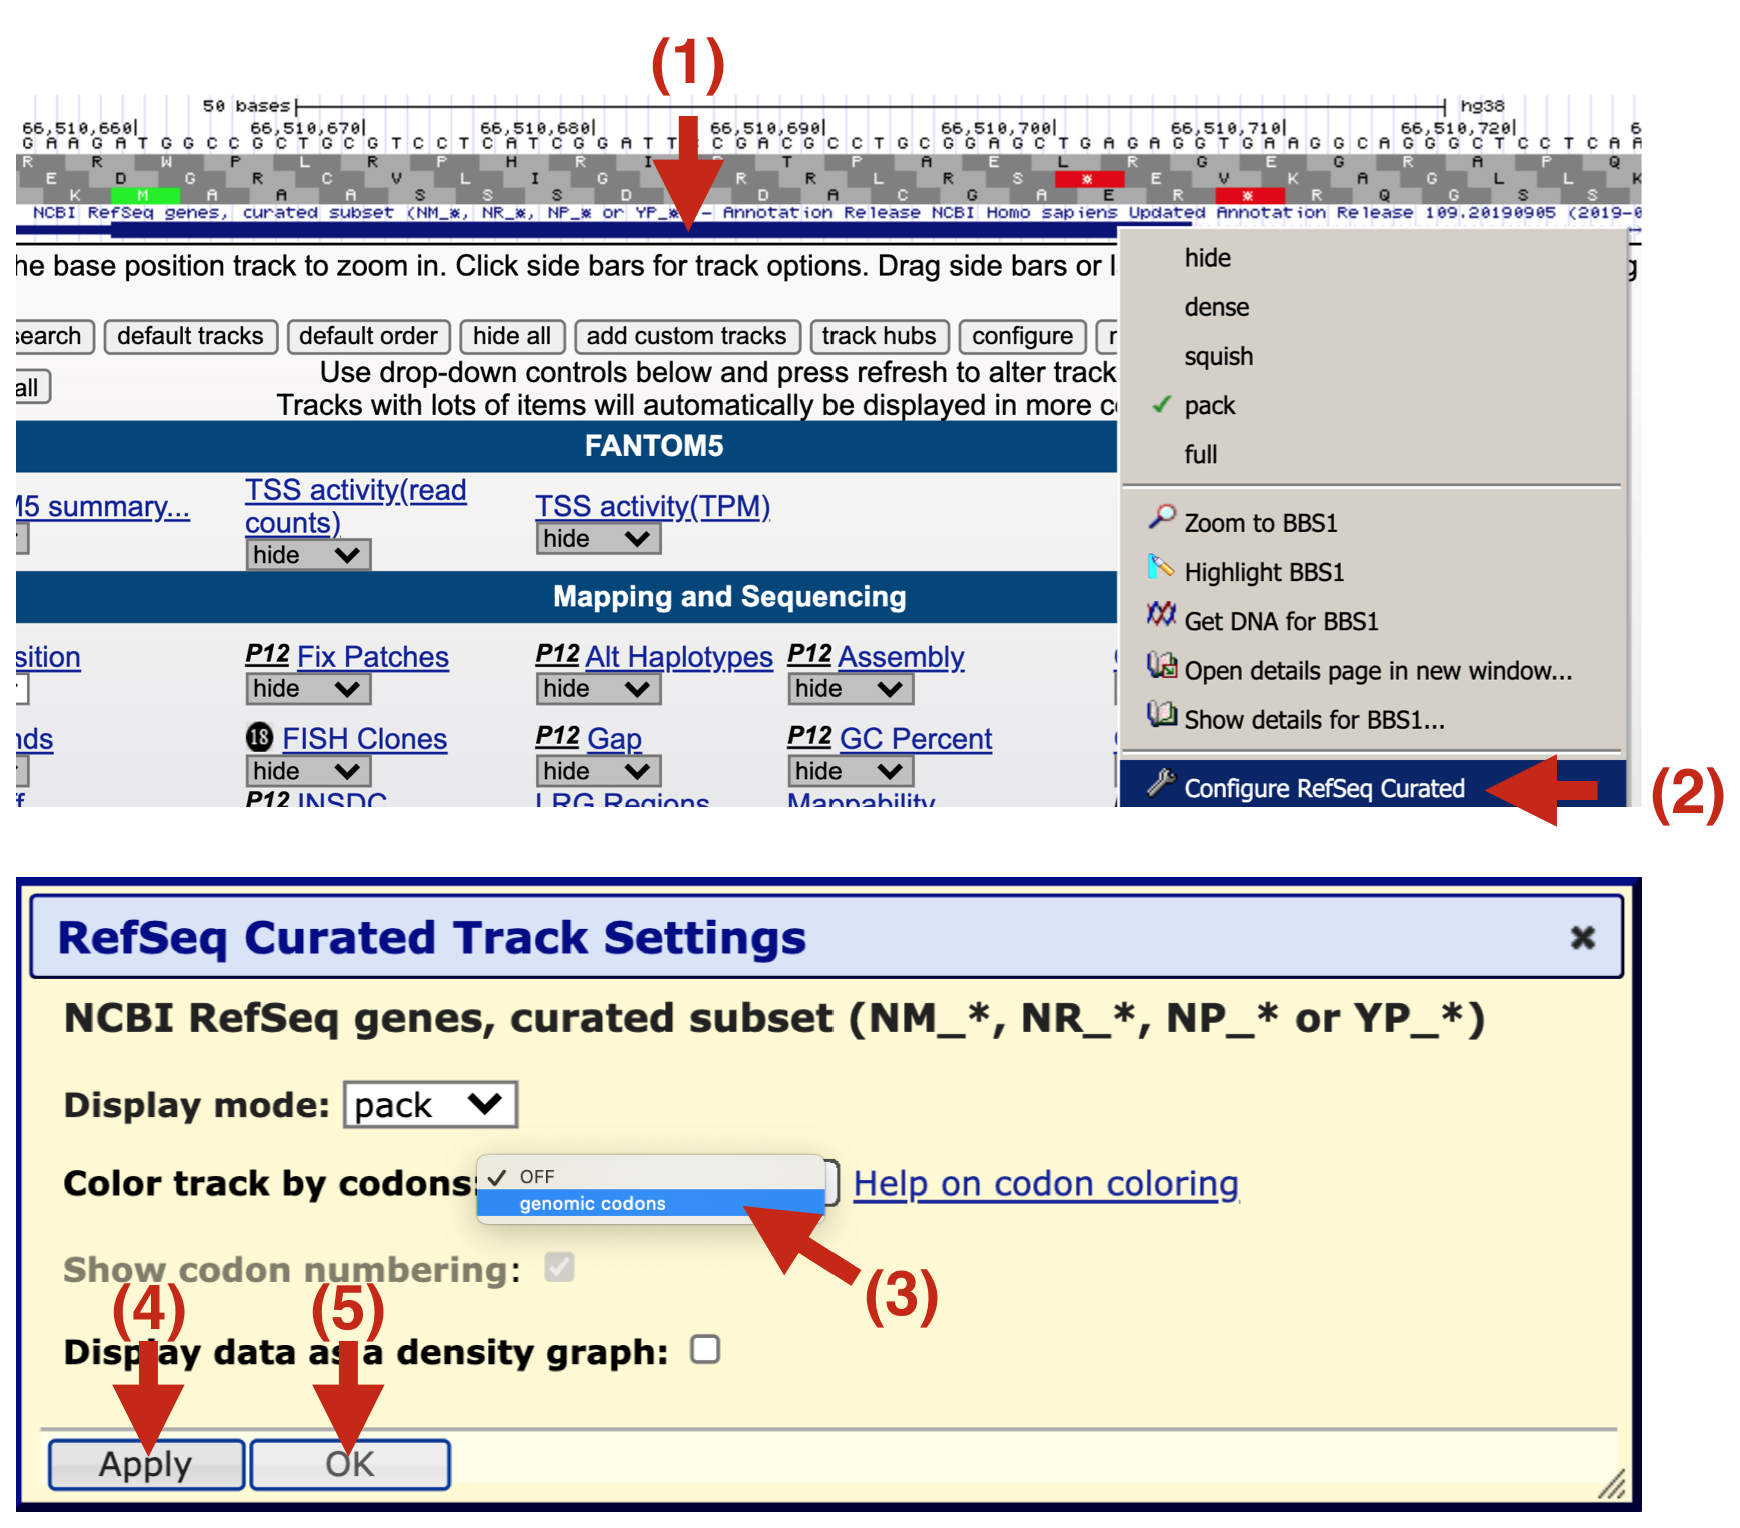 If your gene prediction track does not have the amino acids displayed (See 1 and compare to the figure above), then you will need to configure it anew as described here. 2) Right click on the gene prediction schematic and a pull down menu will appear. Choose 'Configure Refseq Curated'. 3) A new yellow box will appear. Click on the pulldown menu for Color track by codons and choose 'genomic codons'. 4) Click 'Apply' then 5) Click 'OK'